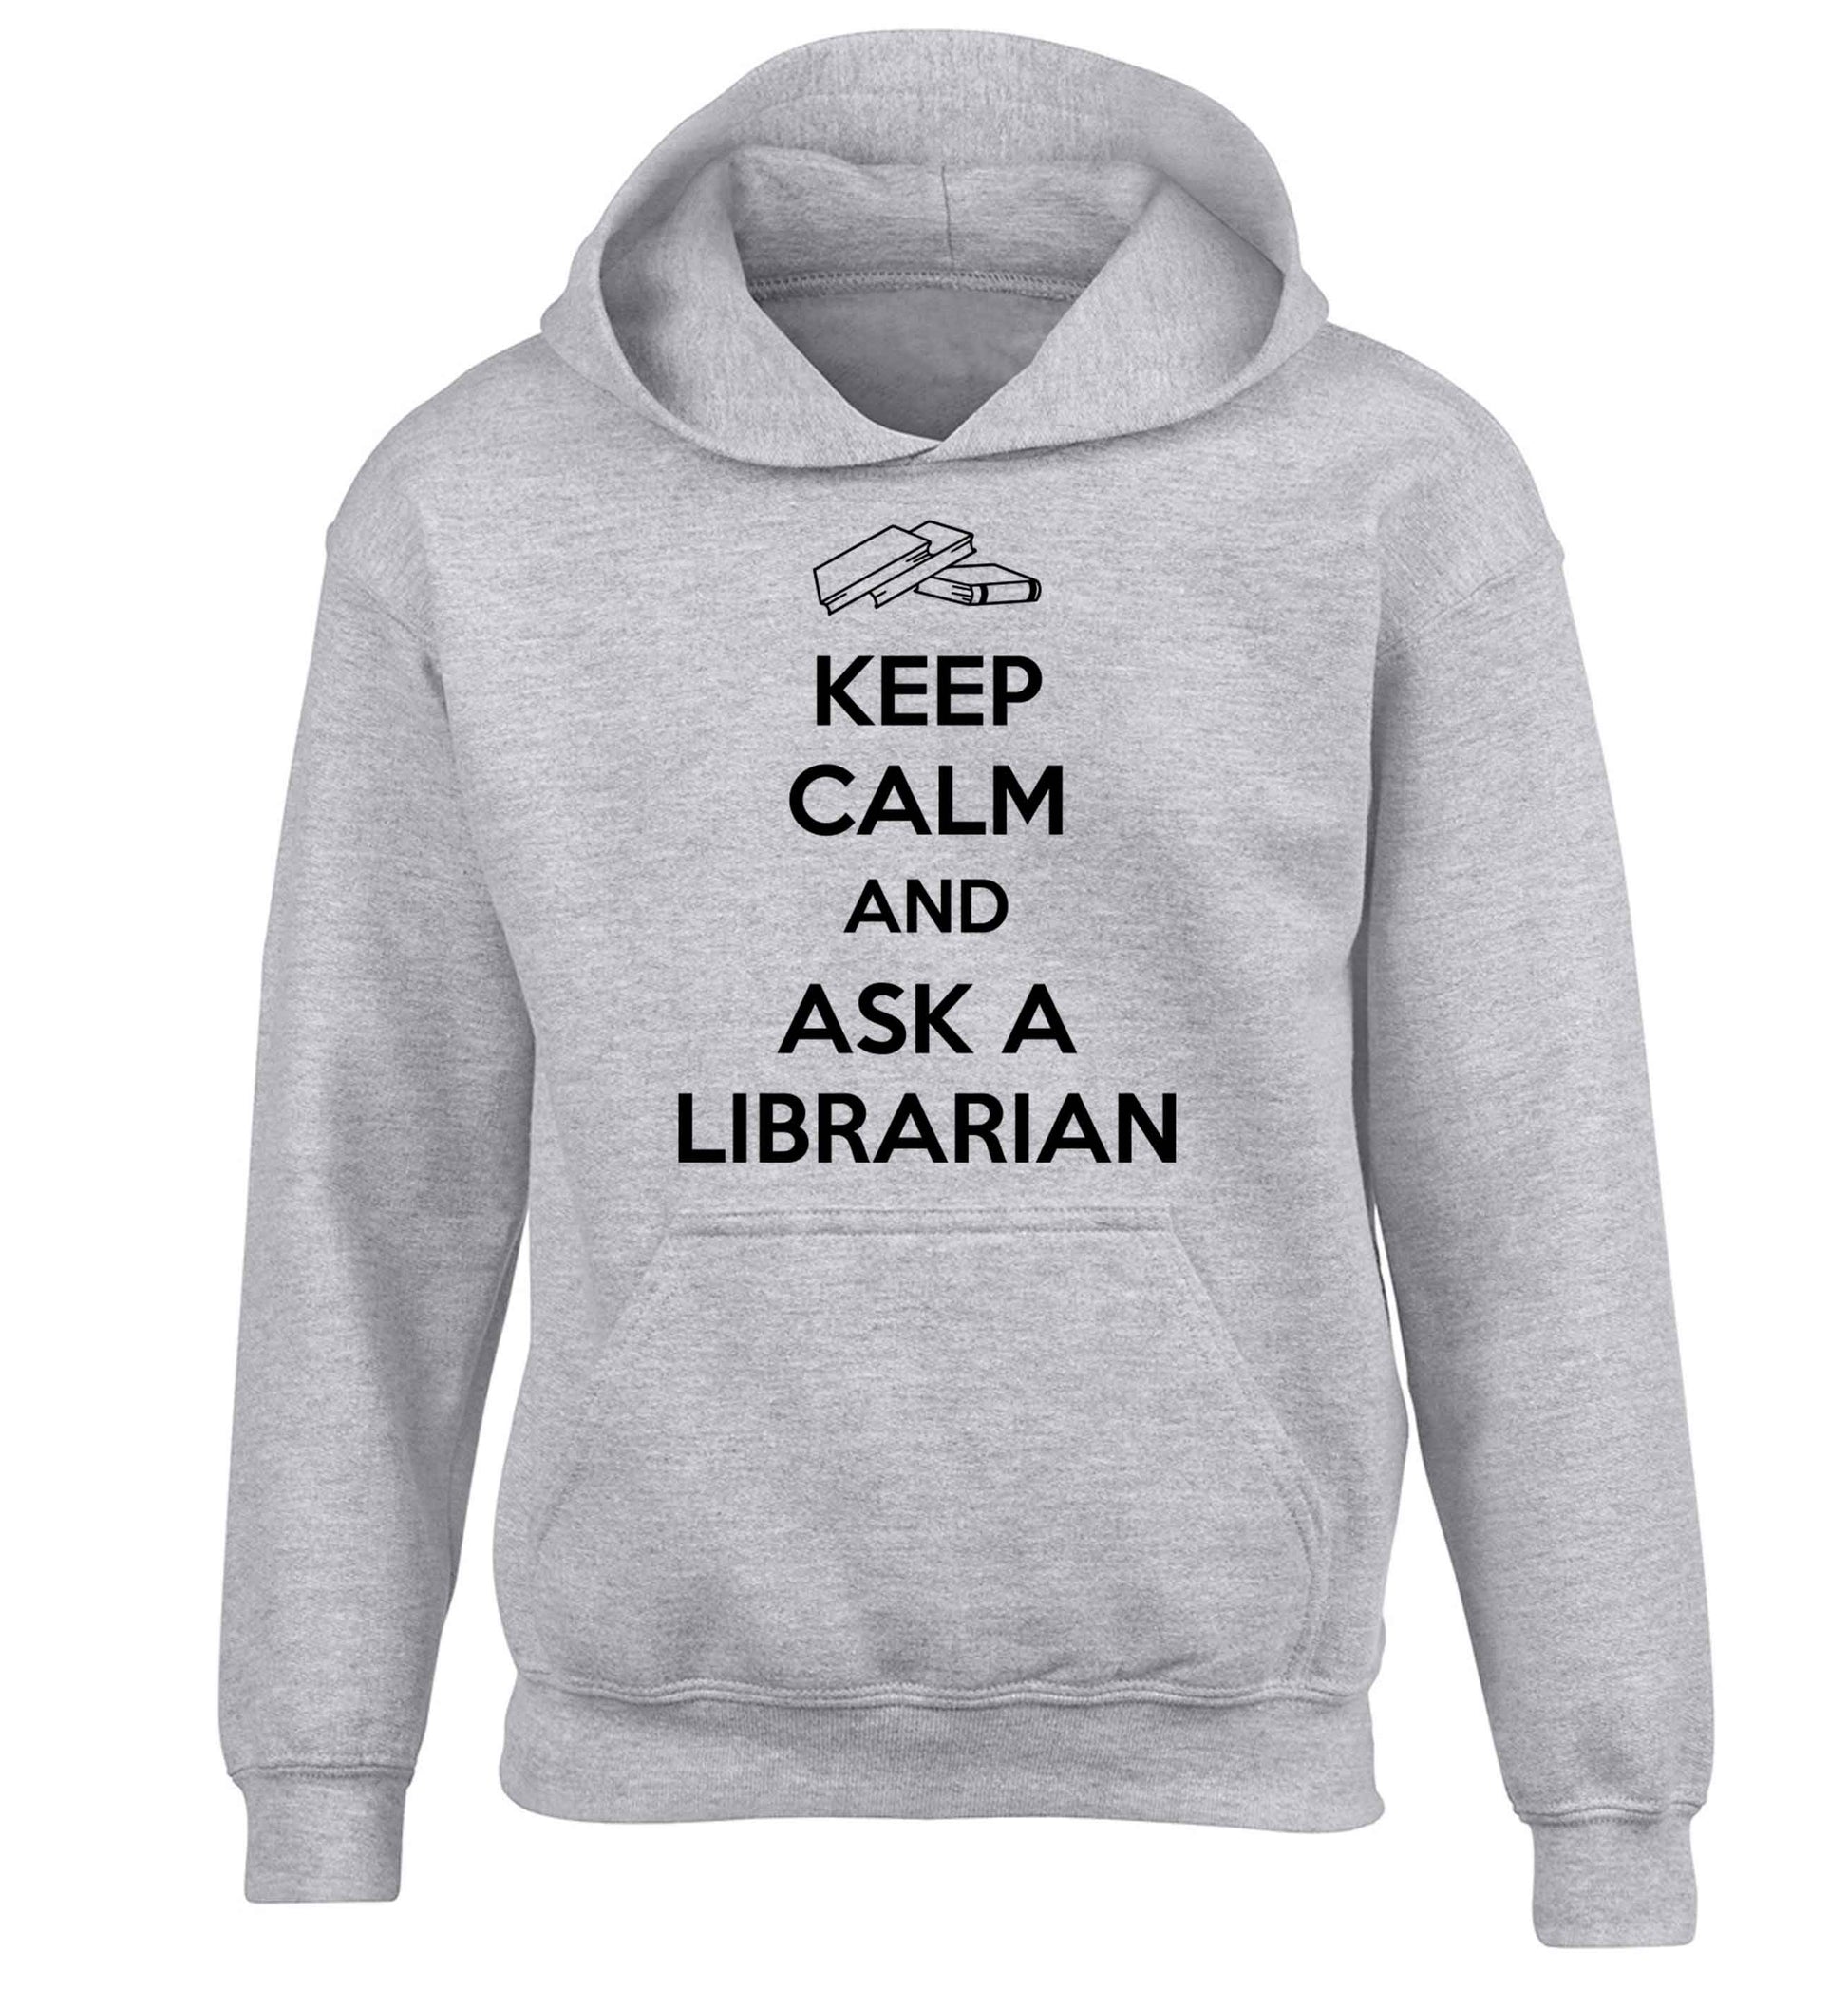 Keep calm and ask a librarian children's grey hoodie 12-13 Years